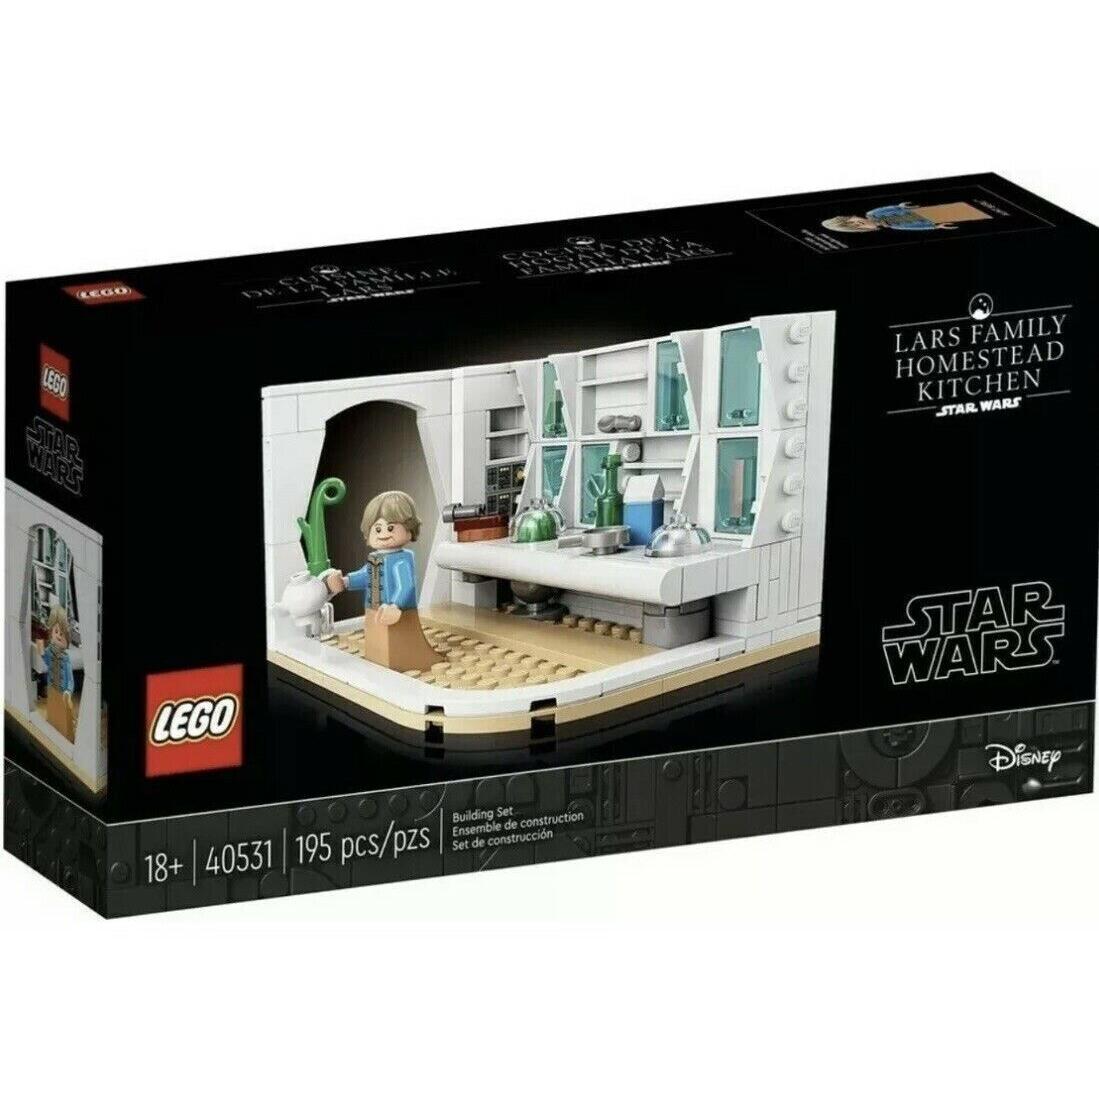 Lego Star Wars 40531 Lars Family Homestead Kitchen May 4th Exclusive Promo Set